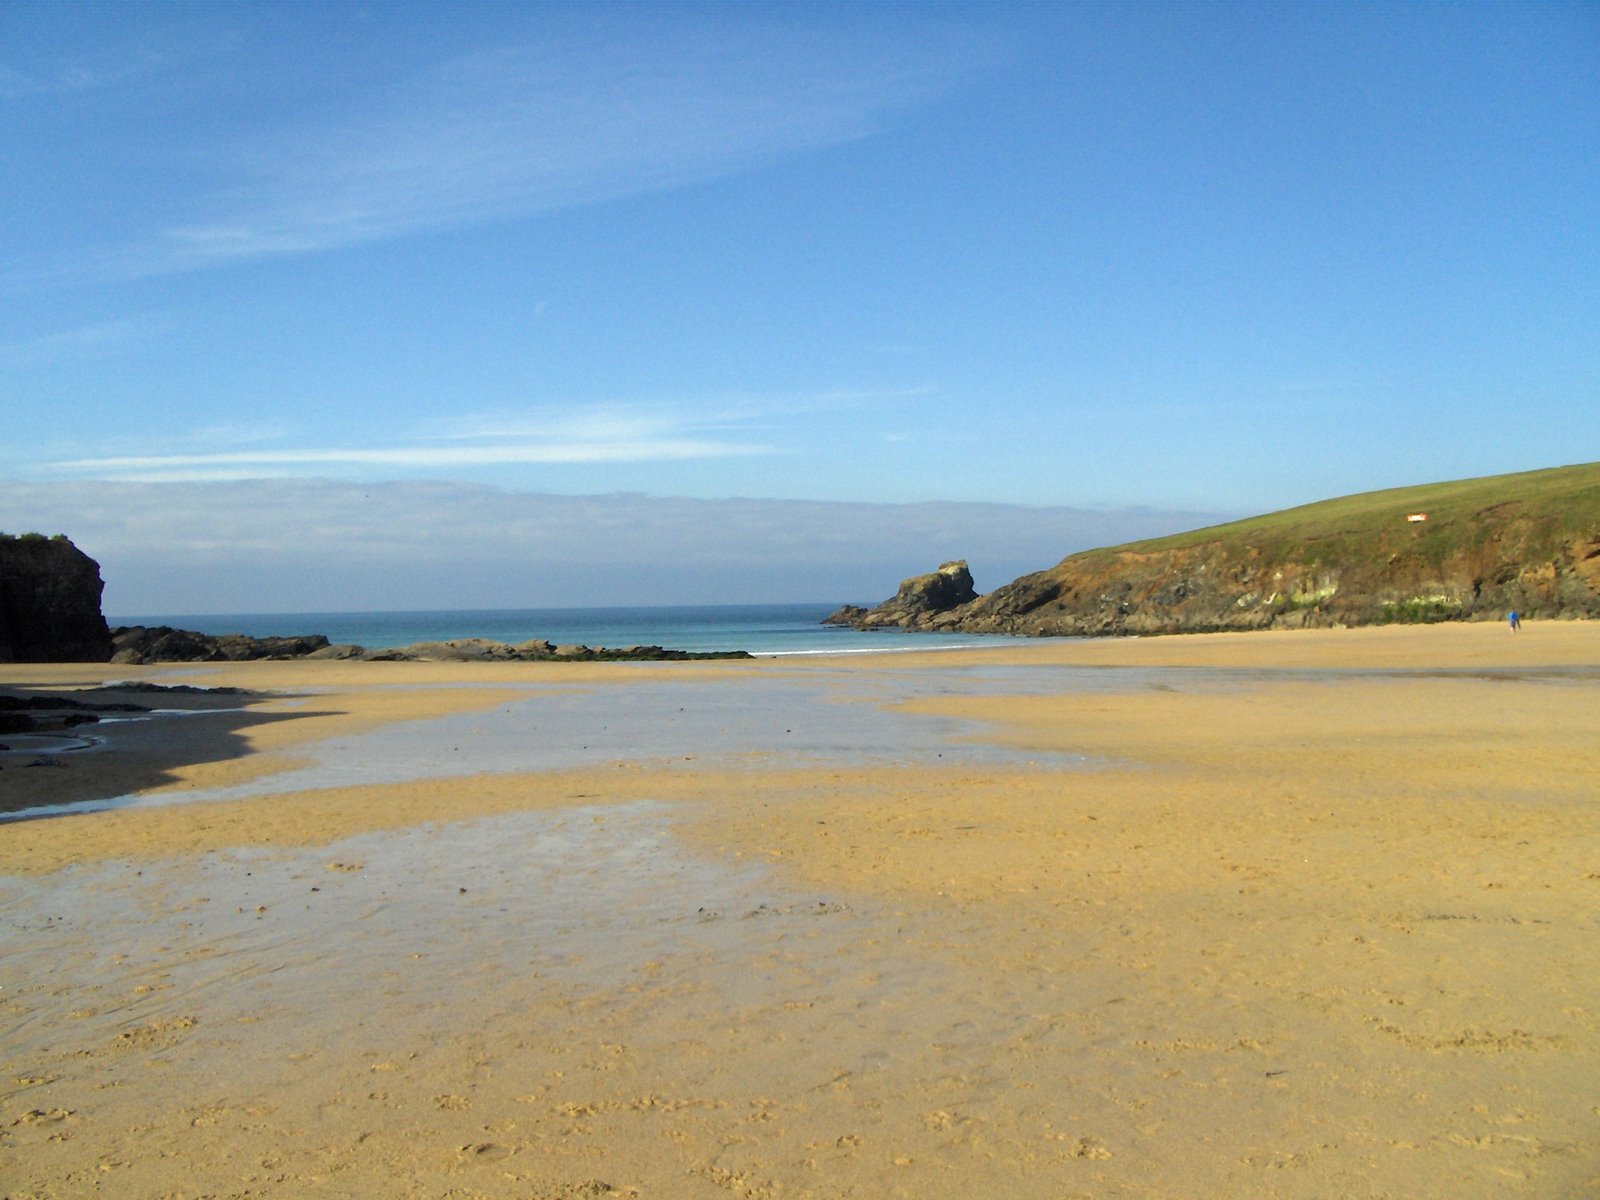 [padstow+and+trevone+018.jpg]